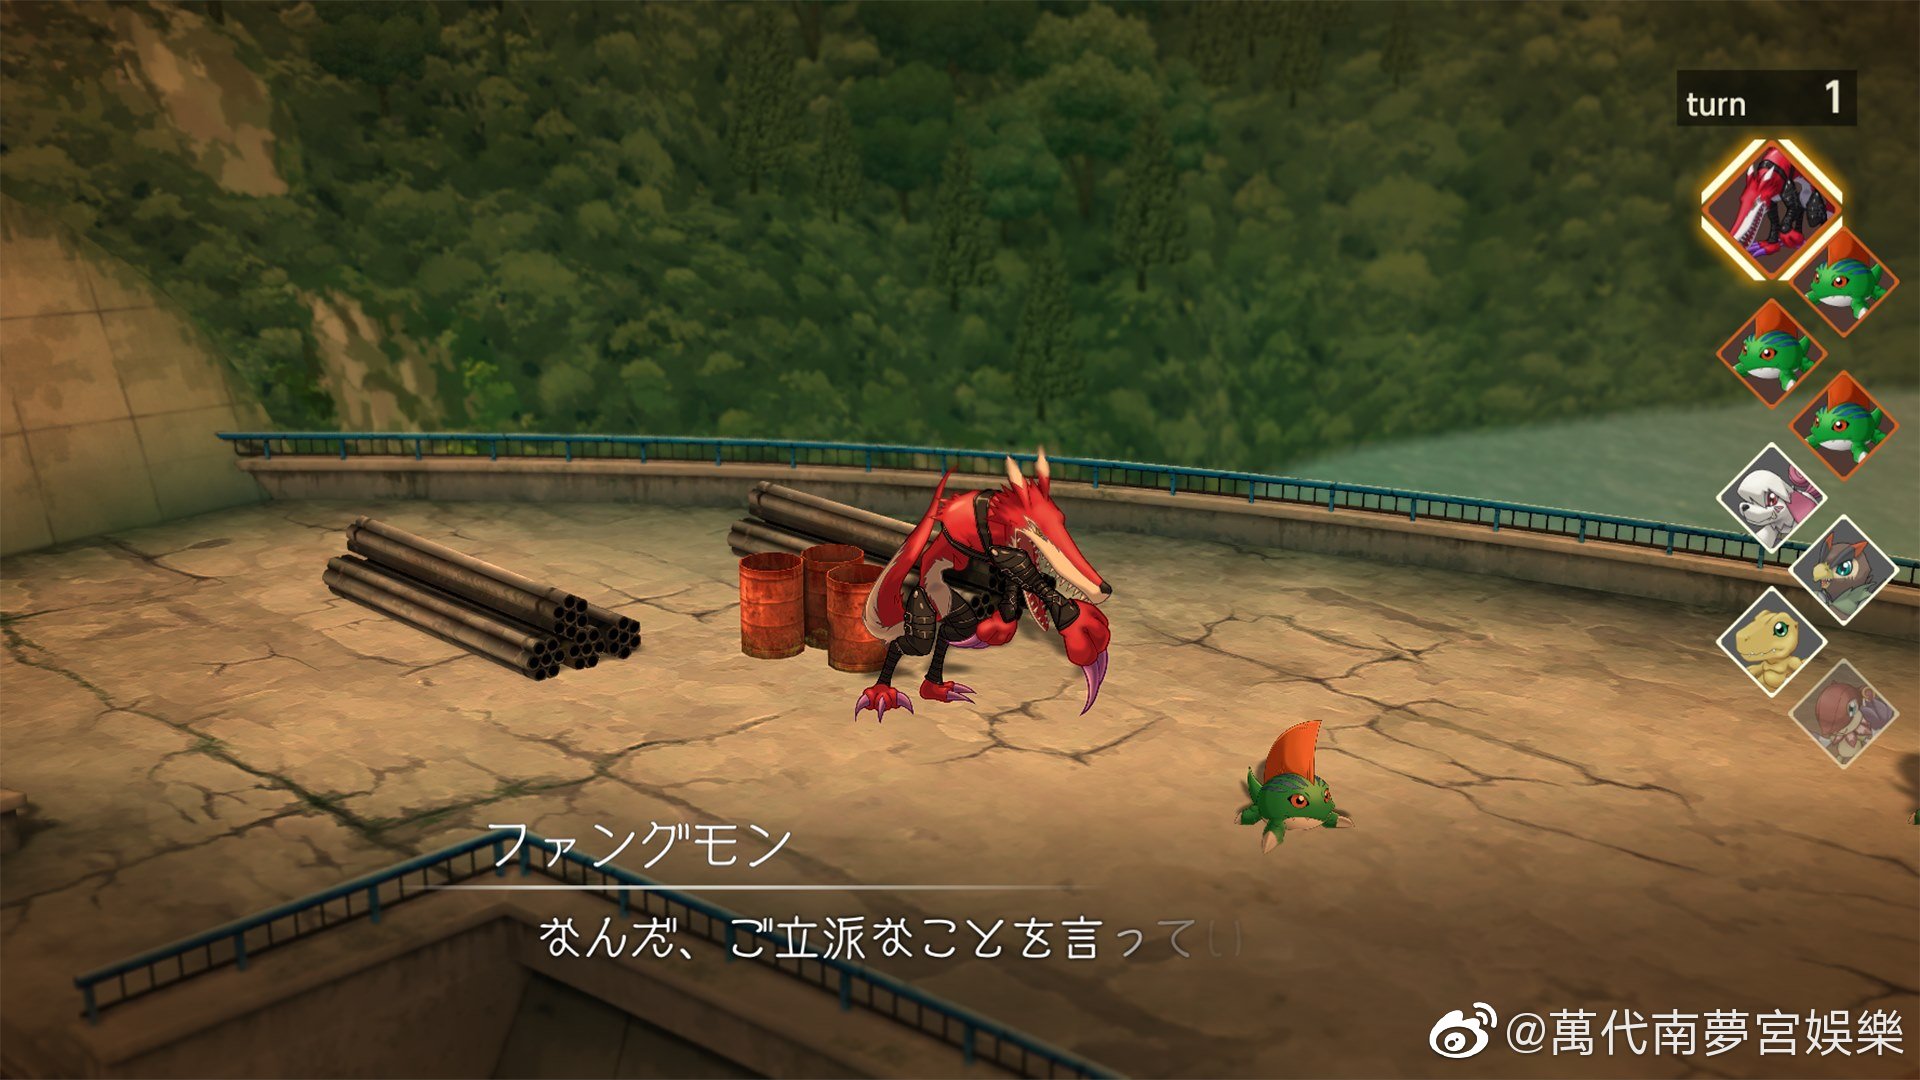 Survive Updates More Digimon, Battle/Map/Dialogue screens, Game